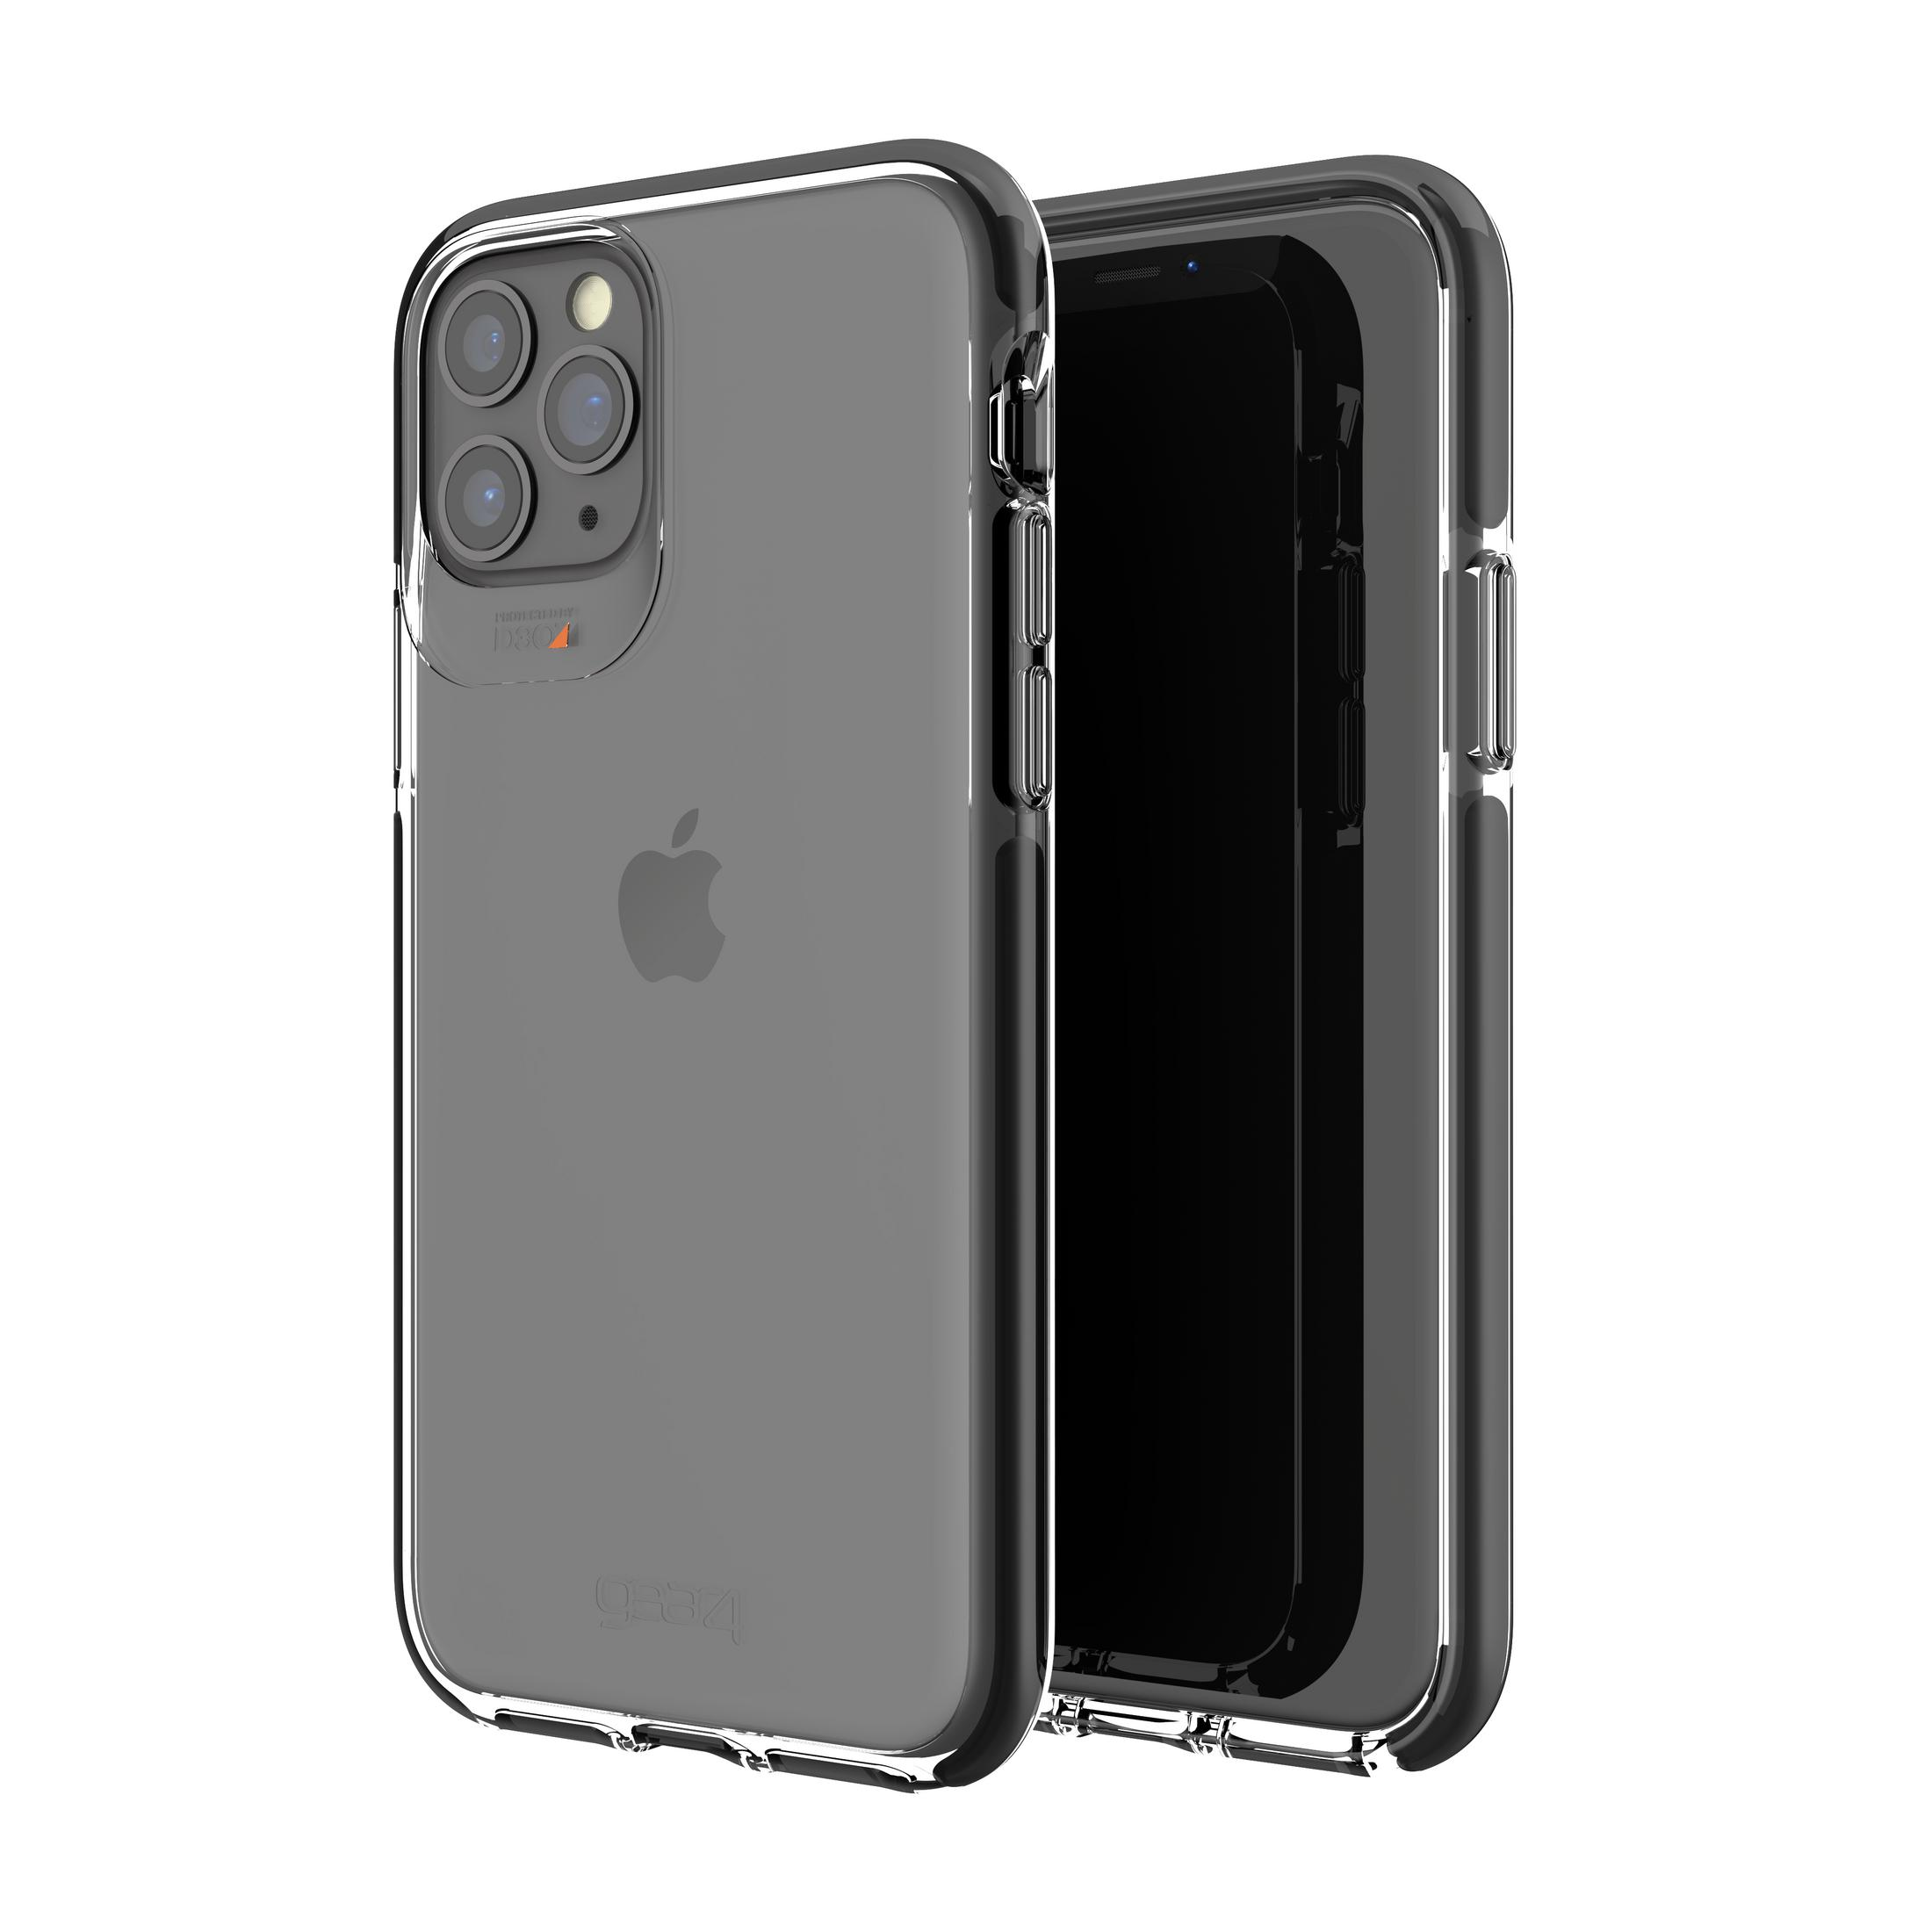 Apple, 0S32919 PRO (BLACK), GEAR4 Schwarz 11 PICCADILLY IPHONE Backcover, iPhone 11 Pro,